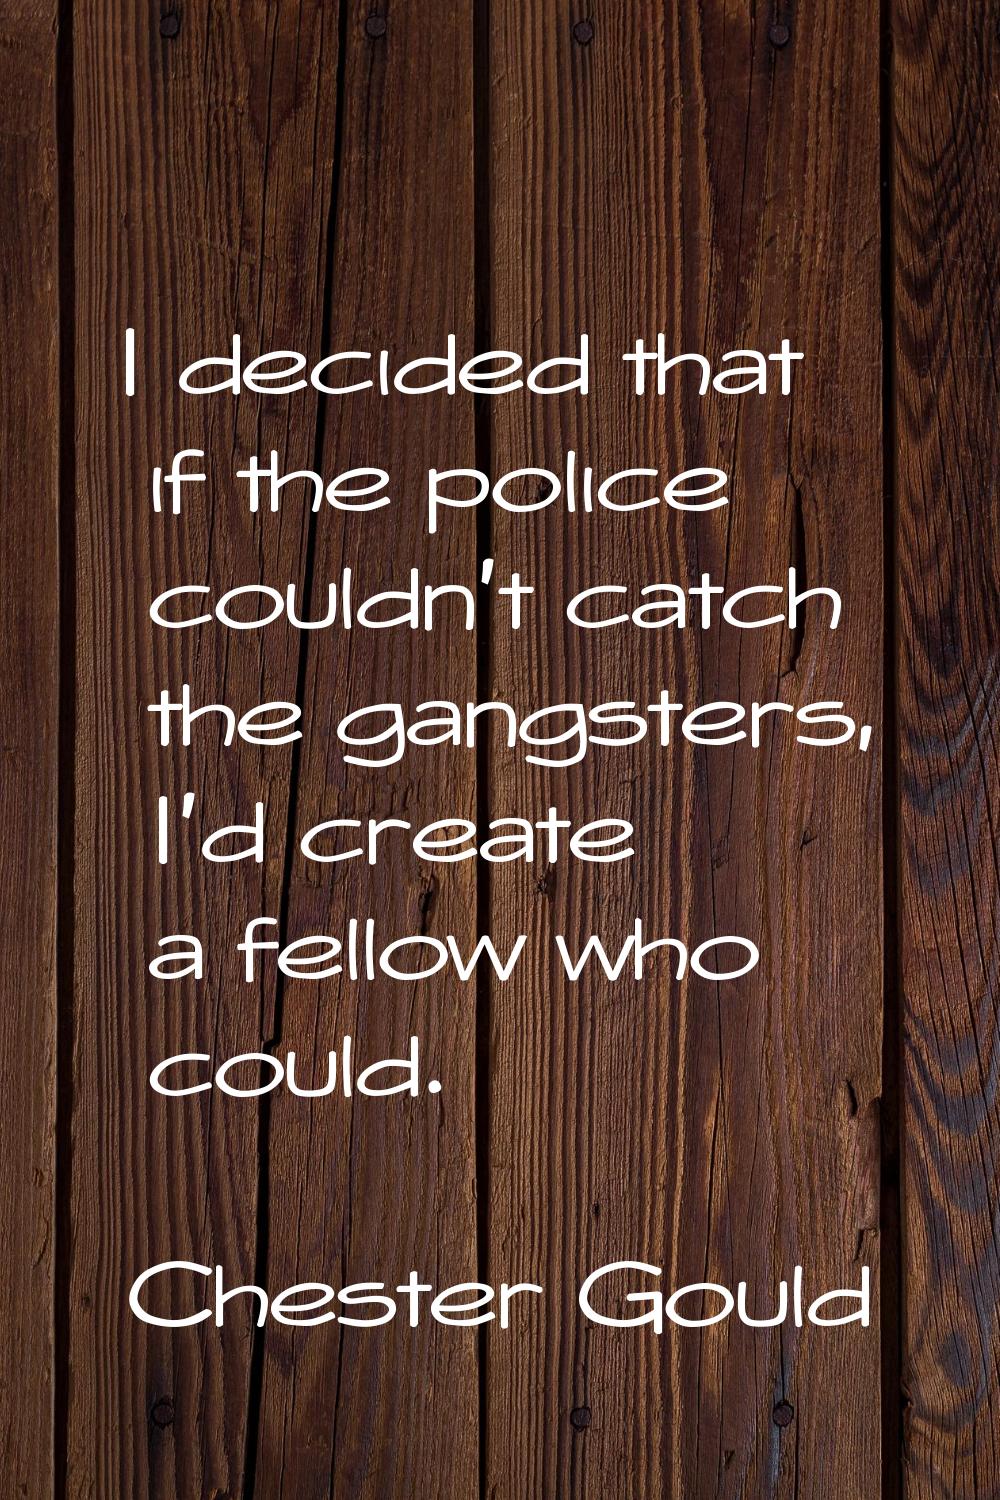 I decided that if the police couldn't catch the gangsters, I'd create a fellow who could.